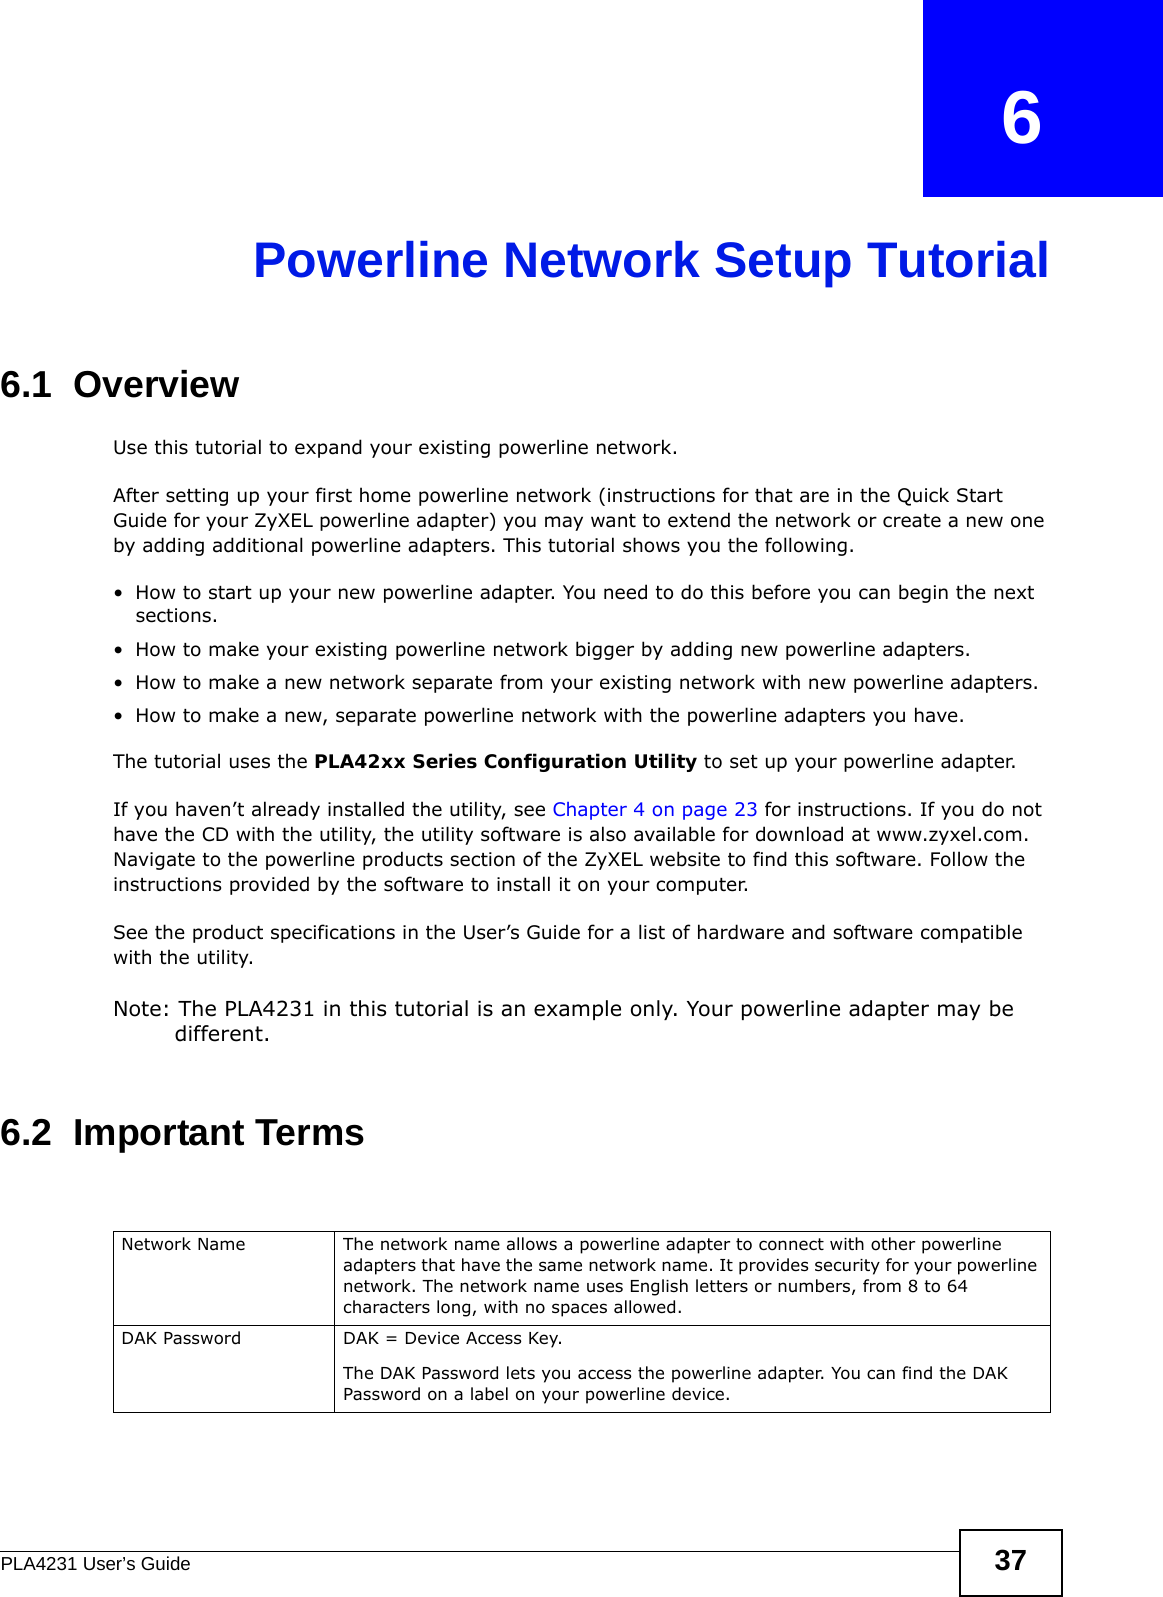 PLA4231 User’s Guide 37CHAPTER   6Powerline Network Setup Tutorial6.1  OverviewUse this tutorial to expand your existing powerline network.After setting up your first home powerline network (instructions for that are in the Quick Start Guide for your ZyXEL powerline adapter) you may want to extend the network or create a new one by adding additional powerline adapters. This tutorial shows you the following.• How to start up your new powerline adapter. You need to do this before you can begin the next sections.• How to make your existing powerline network bigger by adding new powerline adapters.• How to make a new network separate from your existing network with new powerline adapters.• How to make a new, separate powerline network with the powerline adapters you have.The tutorial uses the PLA42xx Series Configuration Utility to set up your powerline adapter. If you haven’t already installed the utility, see Chapter 4 on page 23 for instructions. If you do not have the CD with the utility, the utility software is also available for download at www.zyxel.com. Navigate to the powerline products section of the ZyXEL website to find this software. Follow the instructions provided by the software to install it on your computer. See the product specifications in the User’s Guide for a list of hardware and software compatible with the utility.Note: The PLA4231 in this tutorial is an example only. Your powerline adapter may be different.6.2  Important TermsNetwork Name  The network name allows a powerline adapter to connect with other powerline adapters that have the same network name. It provides security for your powerline network. The network name uses English letters or numbers, from 8 to 64 characters long, with no spaces allowed.DAK Password DAK = Device Access Key. The DAK Password lets you access the powerline adapter. You can find the DAK Password on a label on your powerline device.